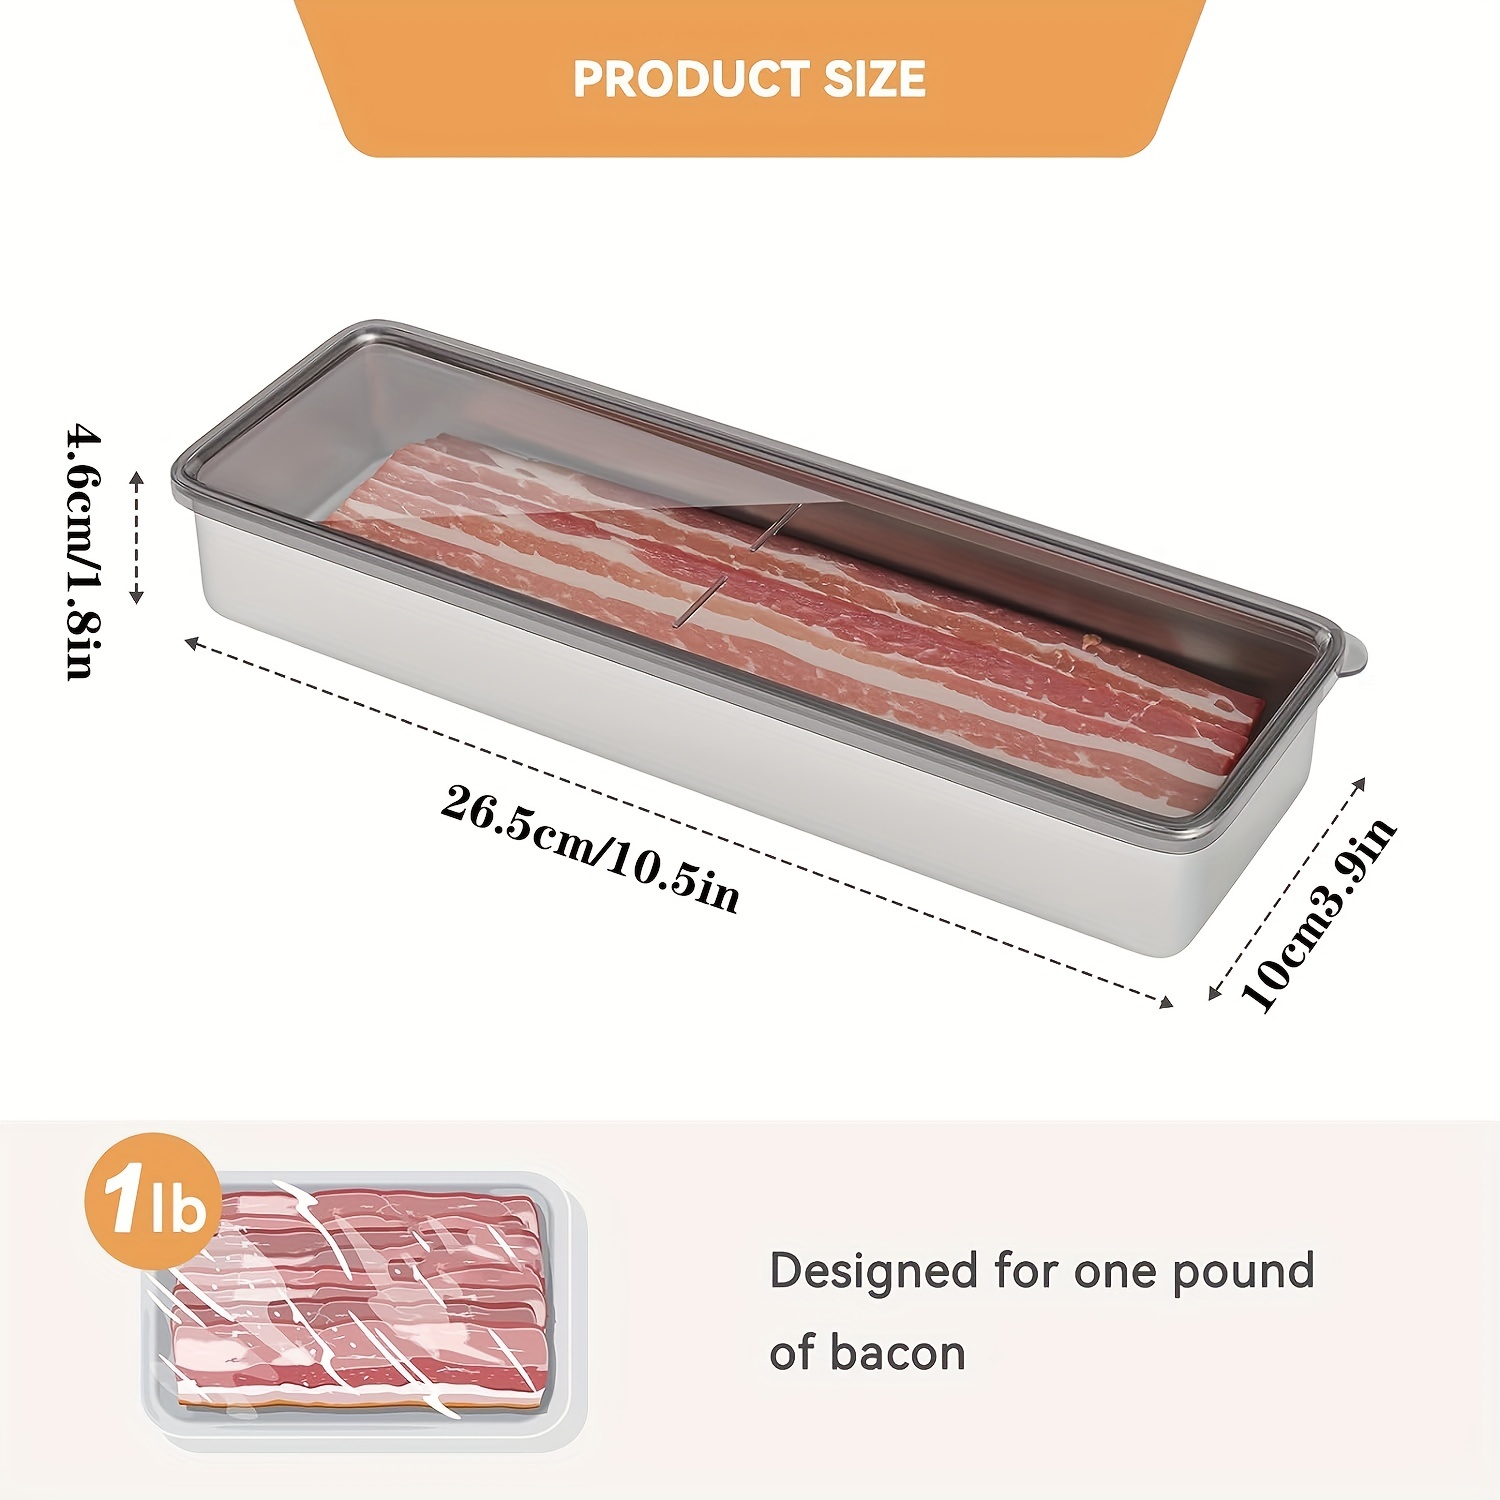 Food-safe Stainless Steel Container Fridge Deli Meat Storage Box